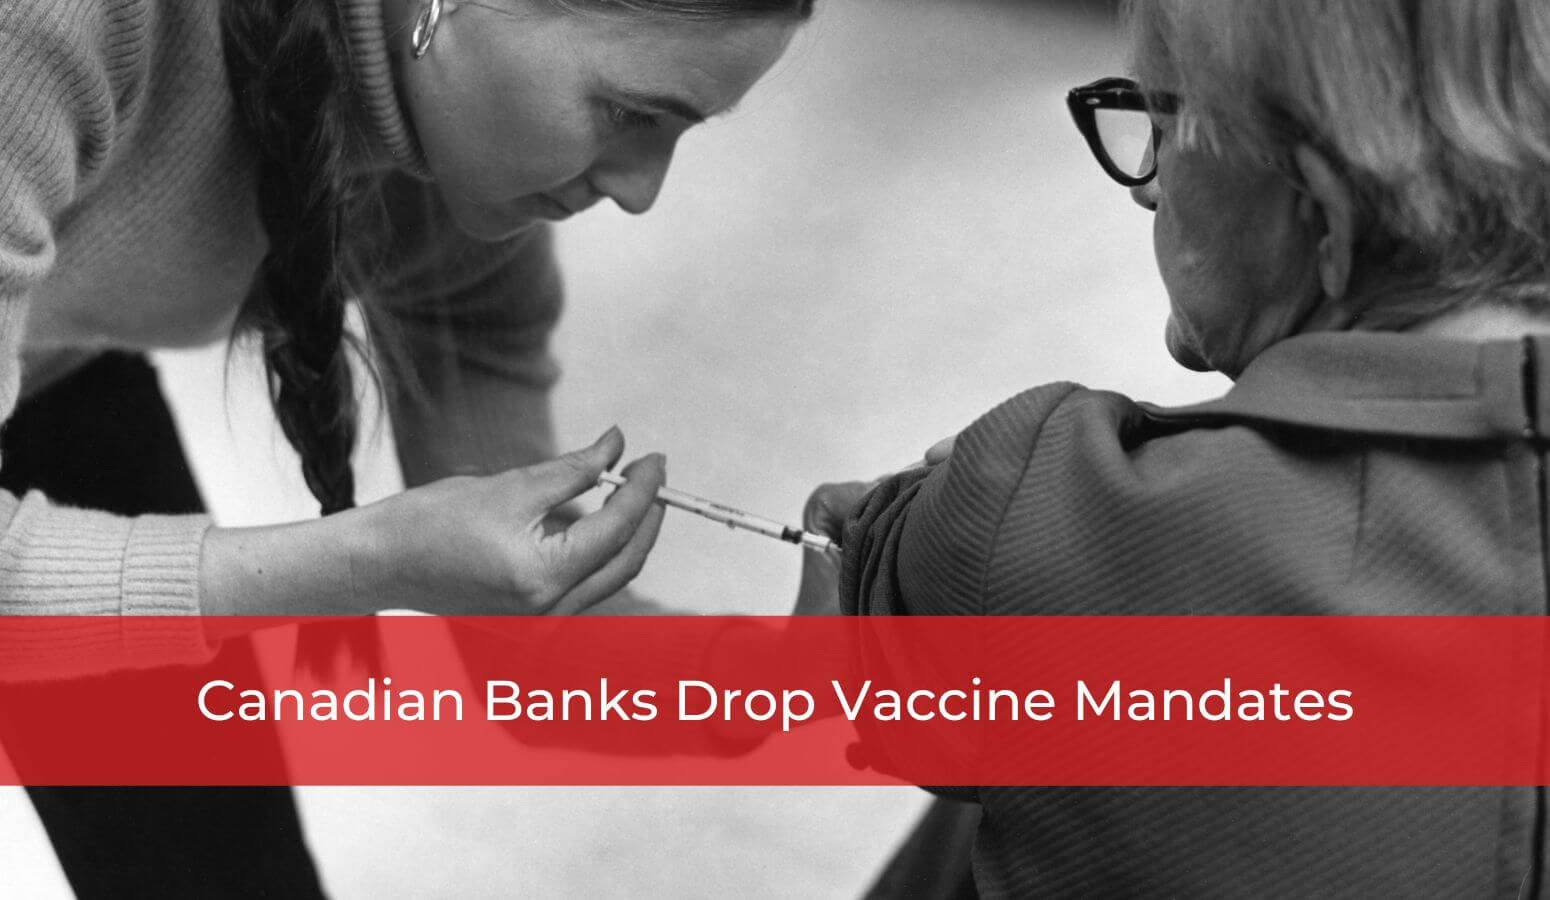 Featured image for “Canadian Banks Drop Vaccine Mandates”